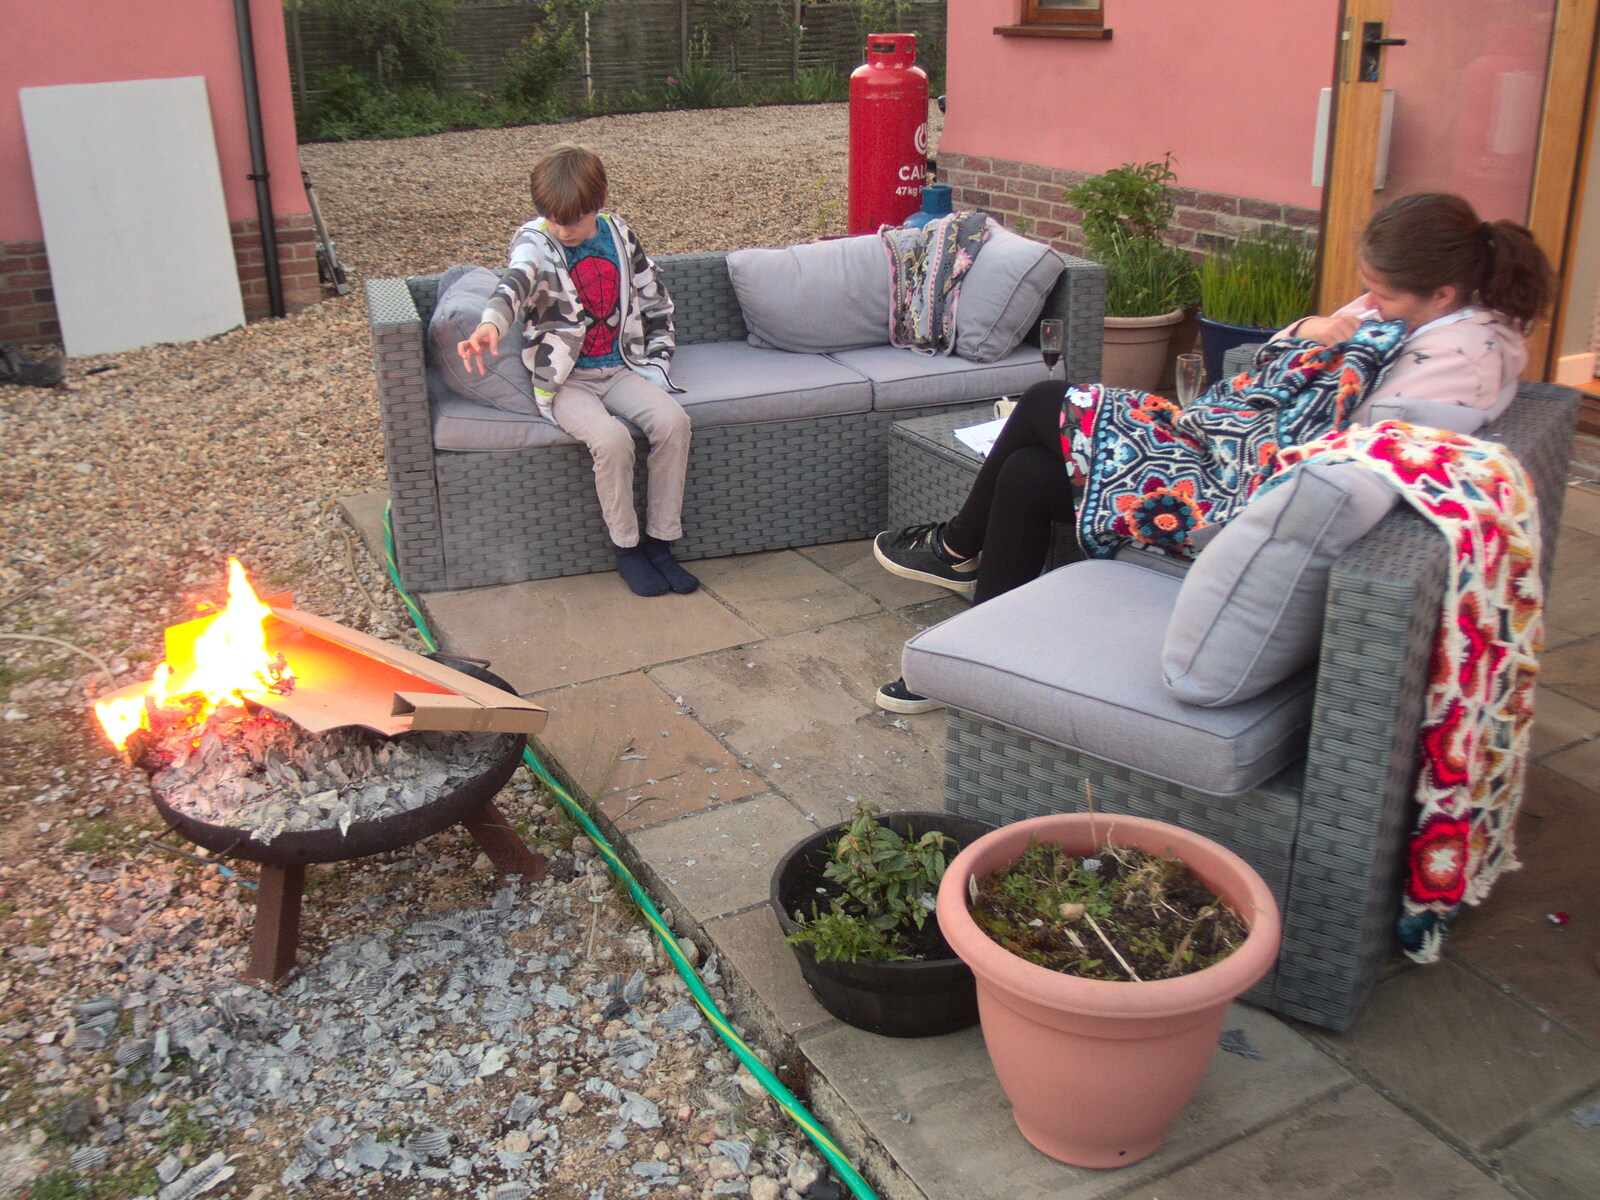 Harry controls fire with his willpower from Garden Centres, and Hamish Visits, Brome, Suffolk - 28th May 2021